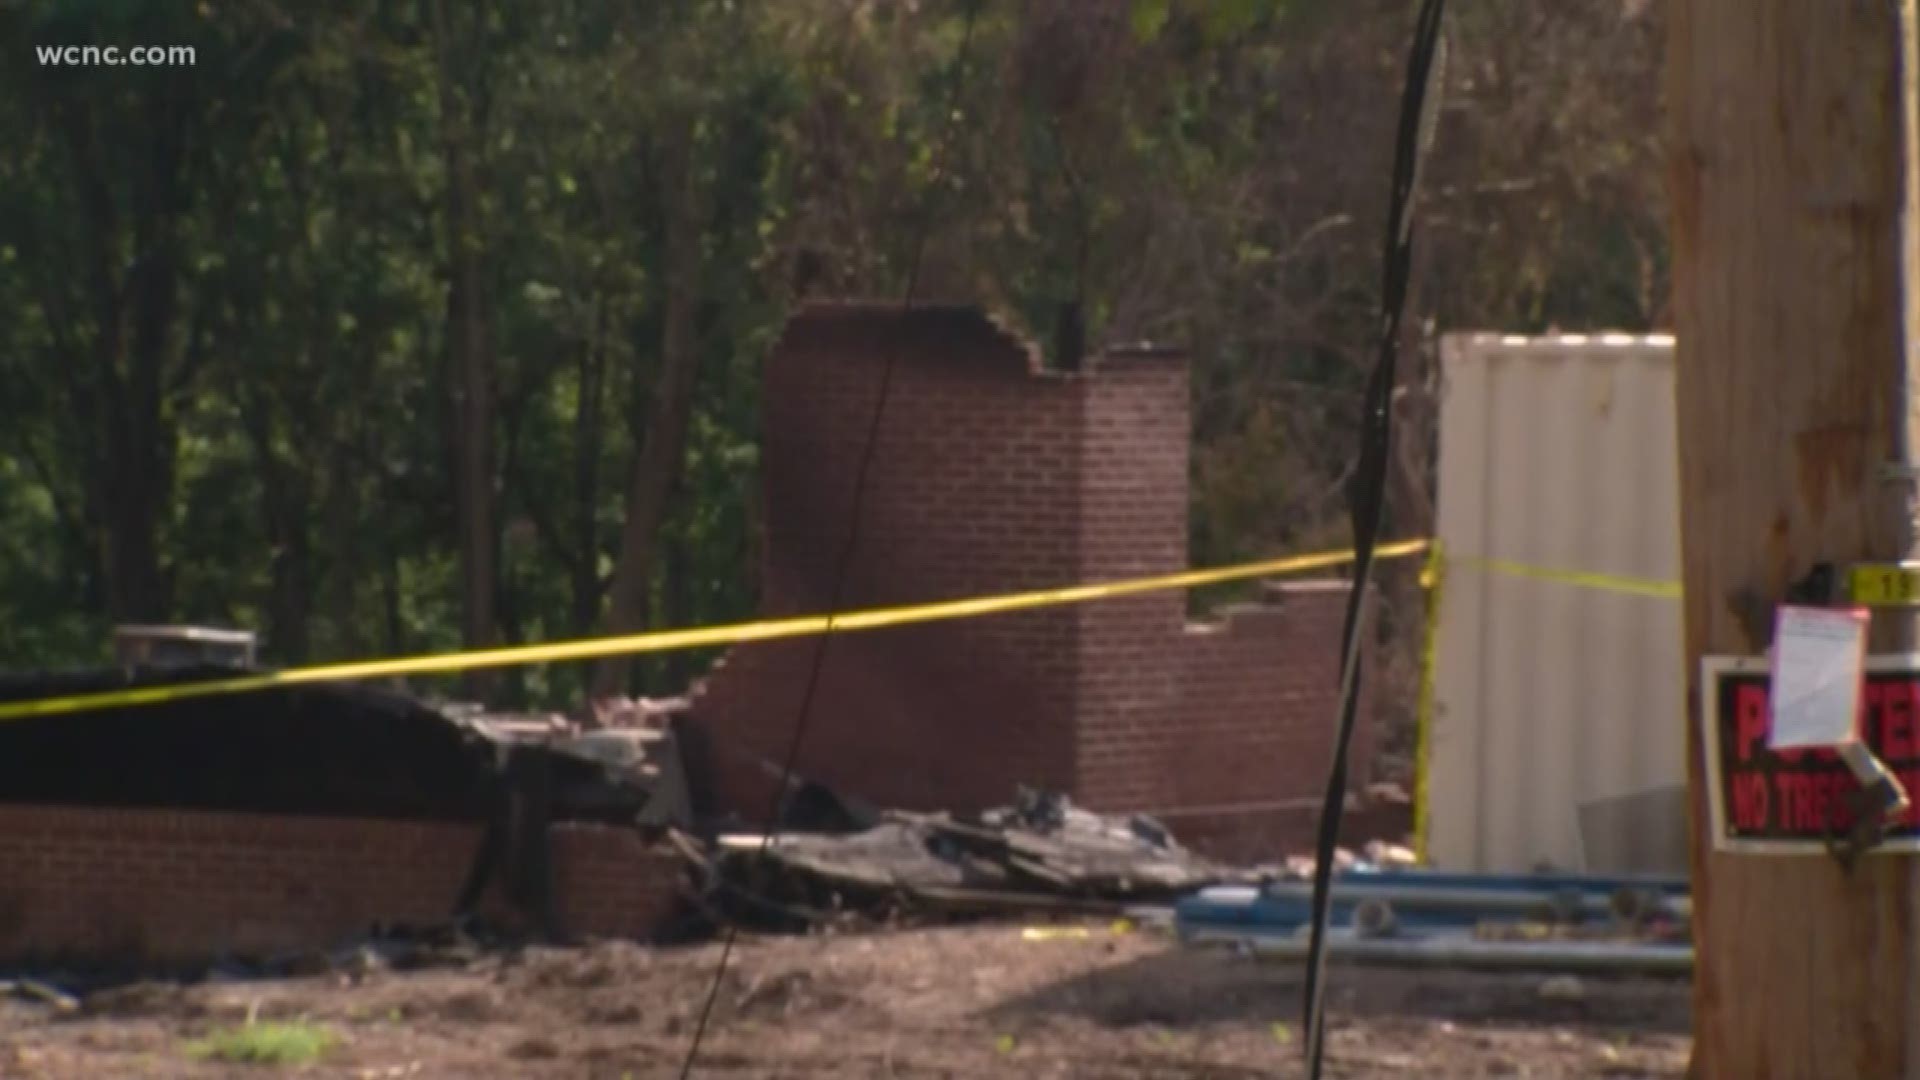 A death investigation is happening in southwest Charlotte after a body was found at a home that caught fire over the weekend.